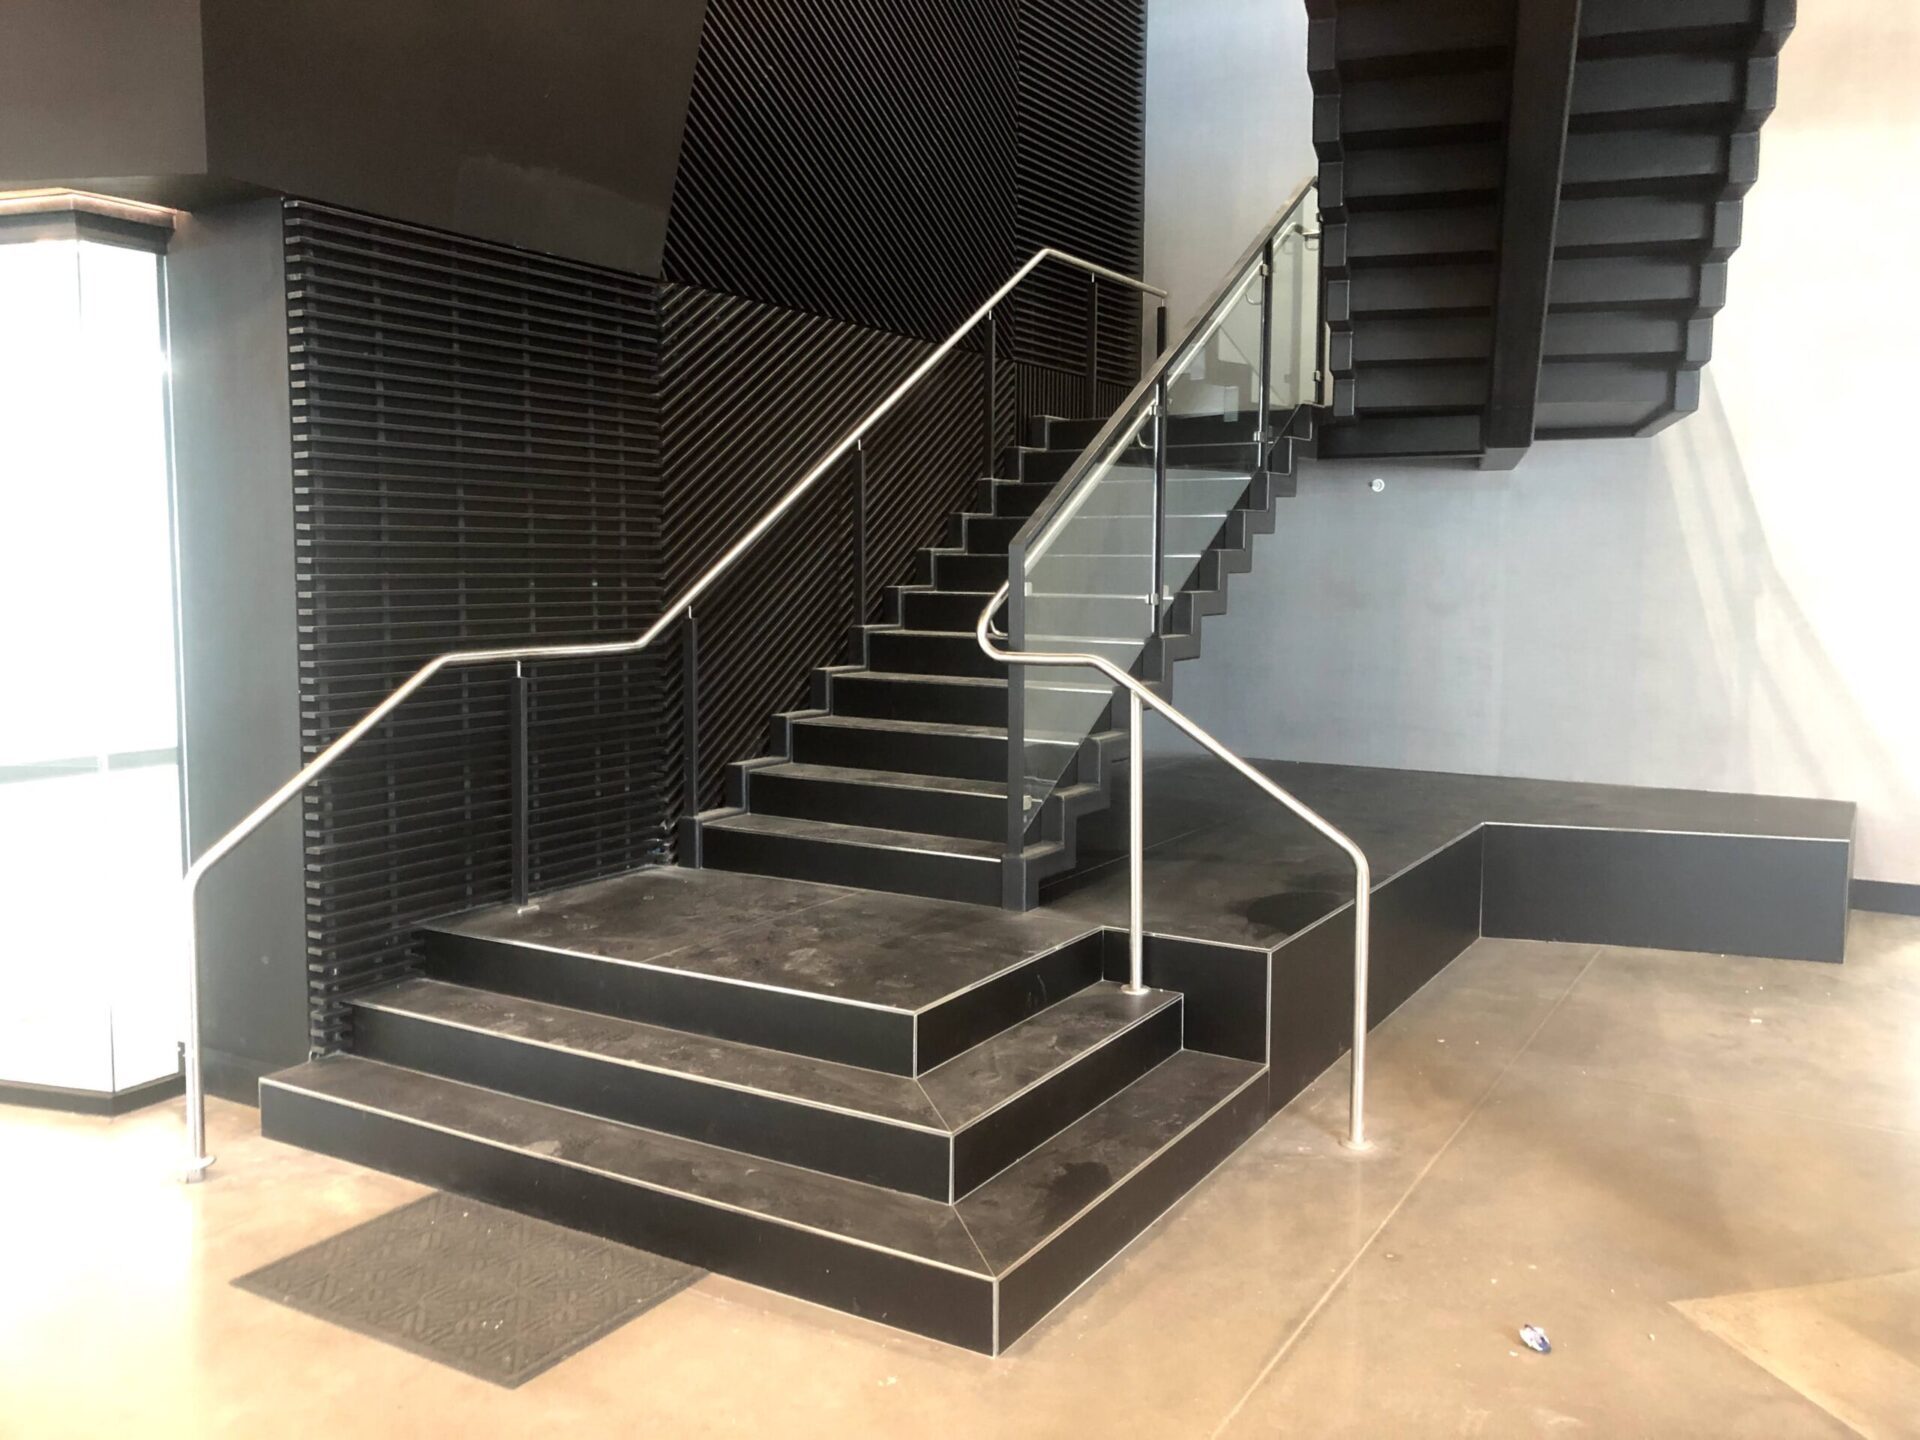 A black staircase with glass and white metal handrails